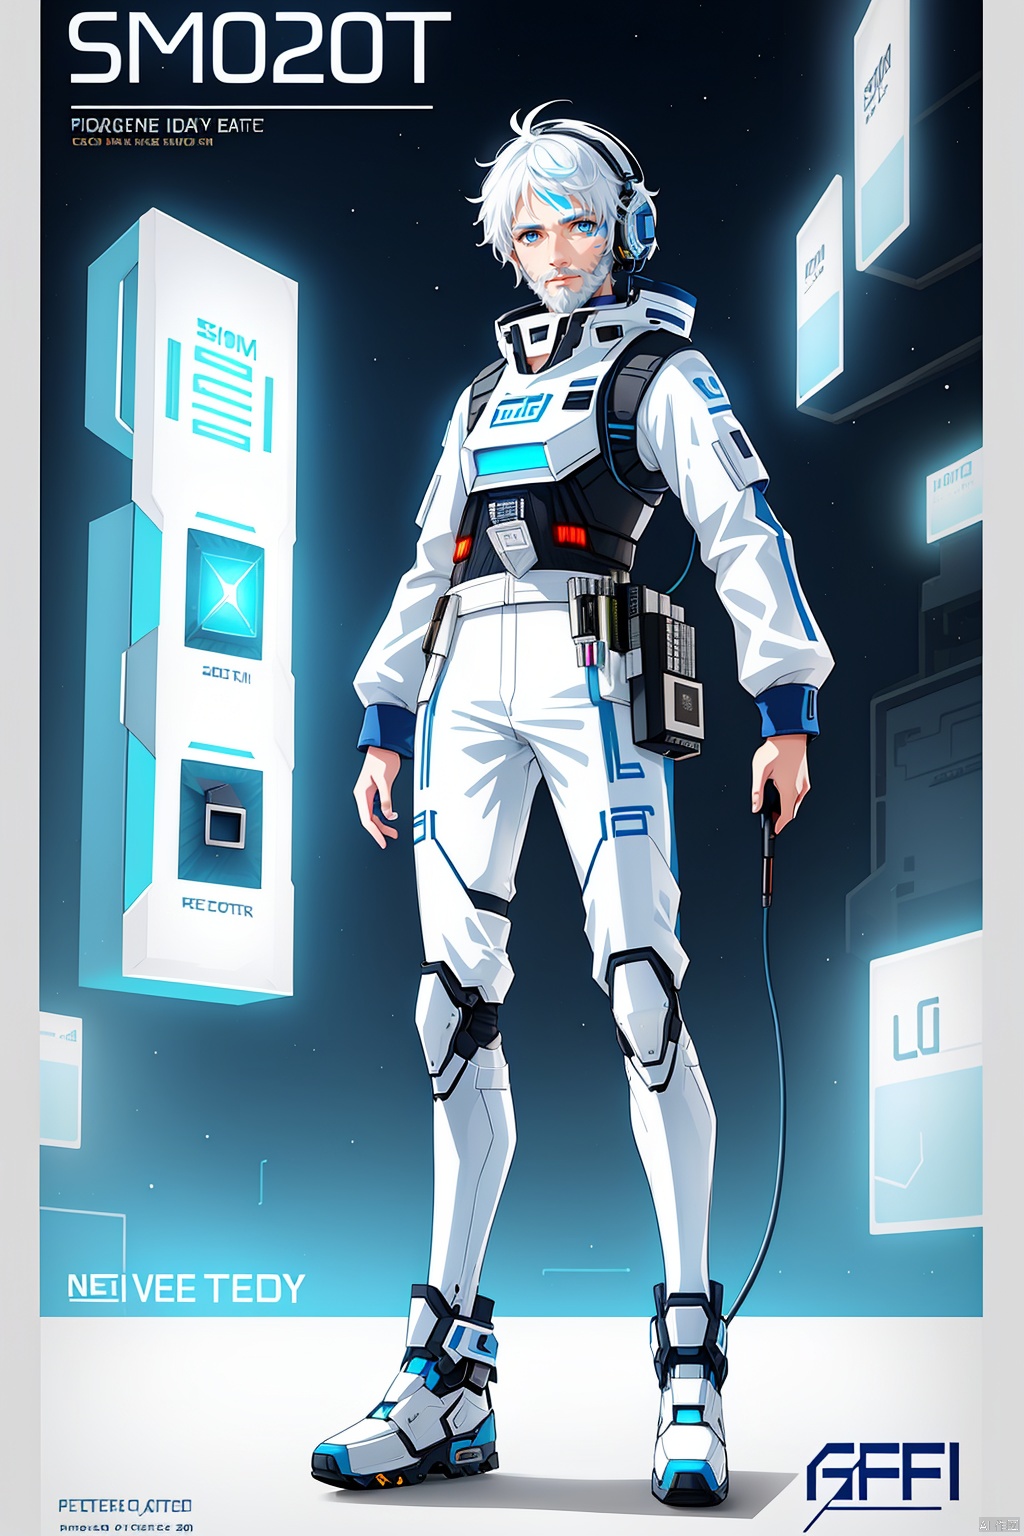  Boy, single, short hair, (blue eyes :1.2), full body, (white hair :1.2), Armor, Sci-fi, Holographic, HD, 32k, Wind, 20 years old, Sunshine, ****, outgoing, lively, Headshot, white space suit, Cyberpunk,Keyboard, mouse, graphics card, console, gamepad,Headphone, Face marker, pointing, realistic, Nose, pilot suit, beard pen, face paint, mechanical core, (graphics card fan :1.2), mechanical leg, graphics card promotional figure, male image